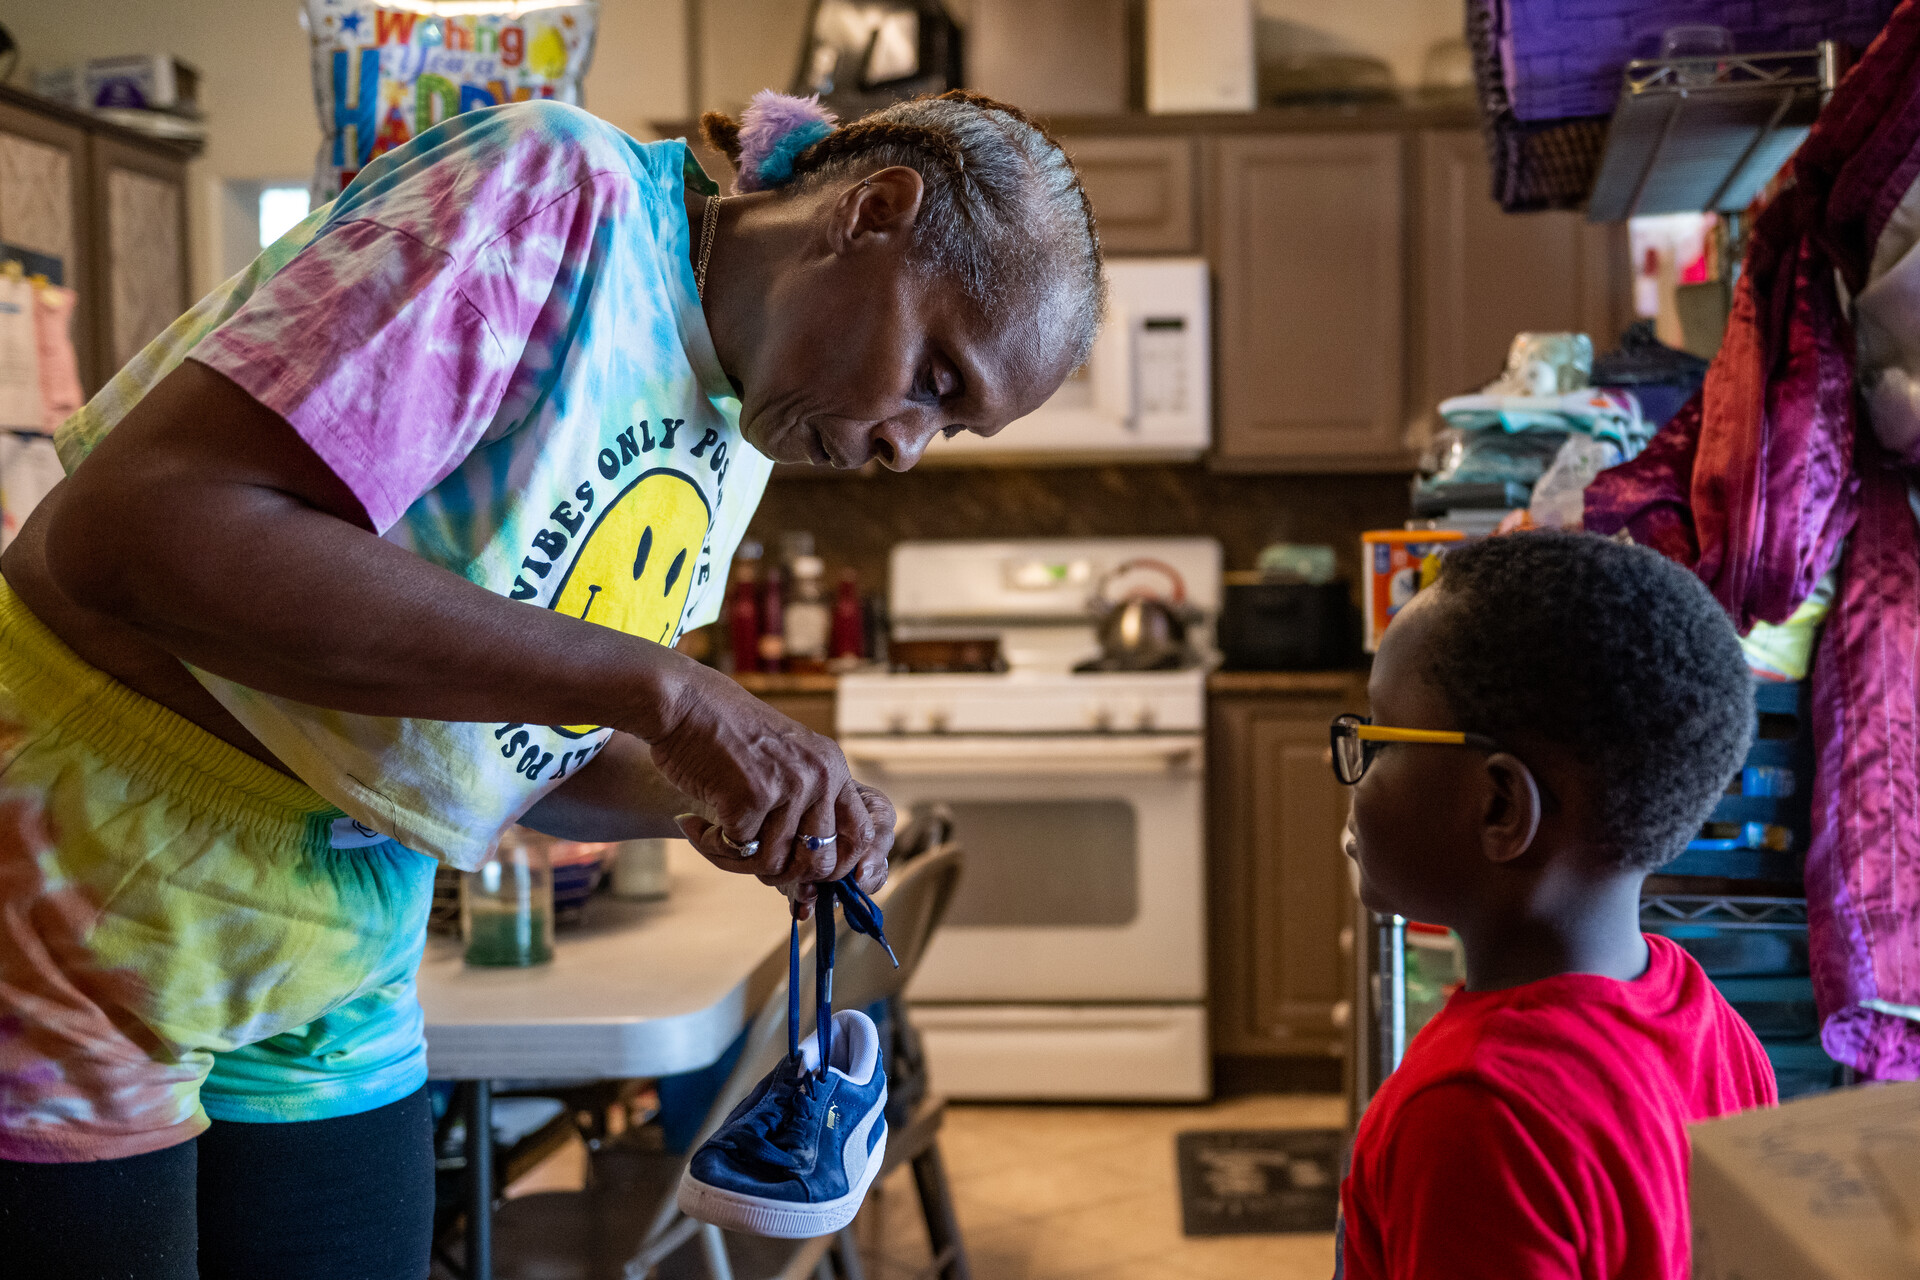 An at-home child care worker in a rainbow T-shirt helps a little boy in a red T-shirt untie a knot in his black sneaker laces.